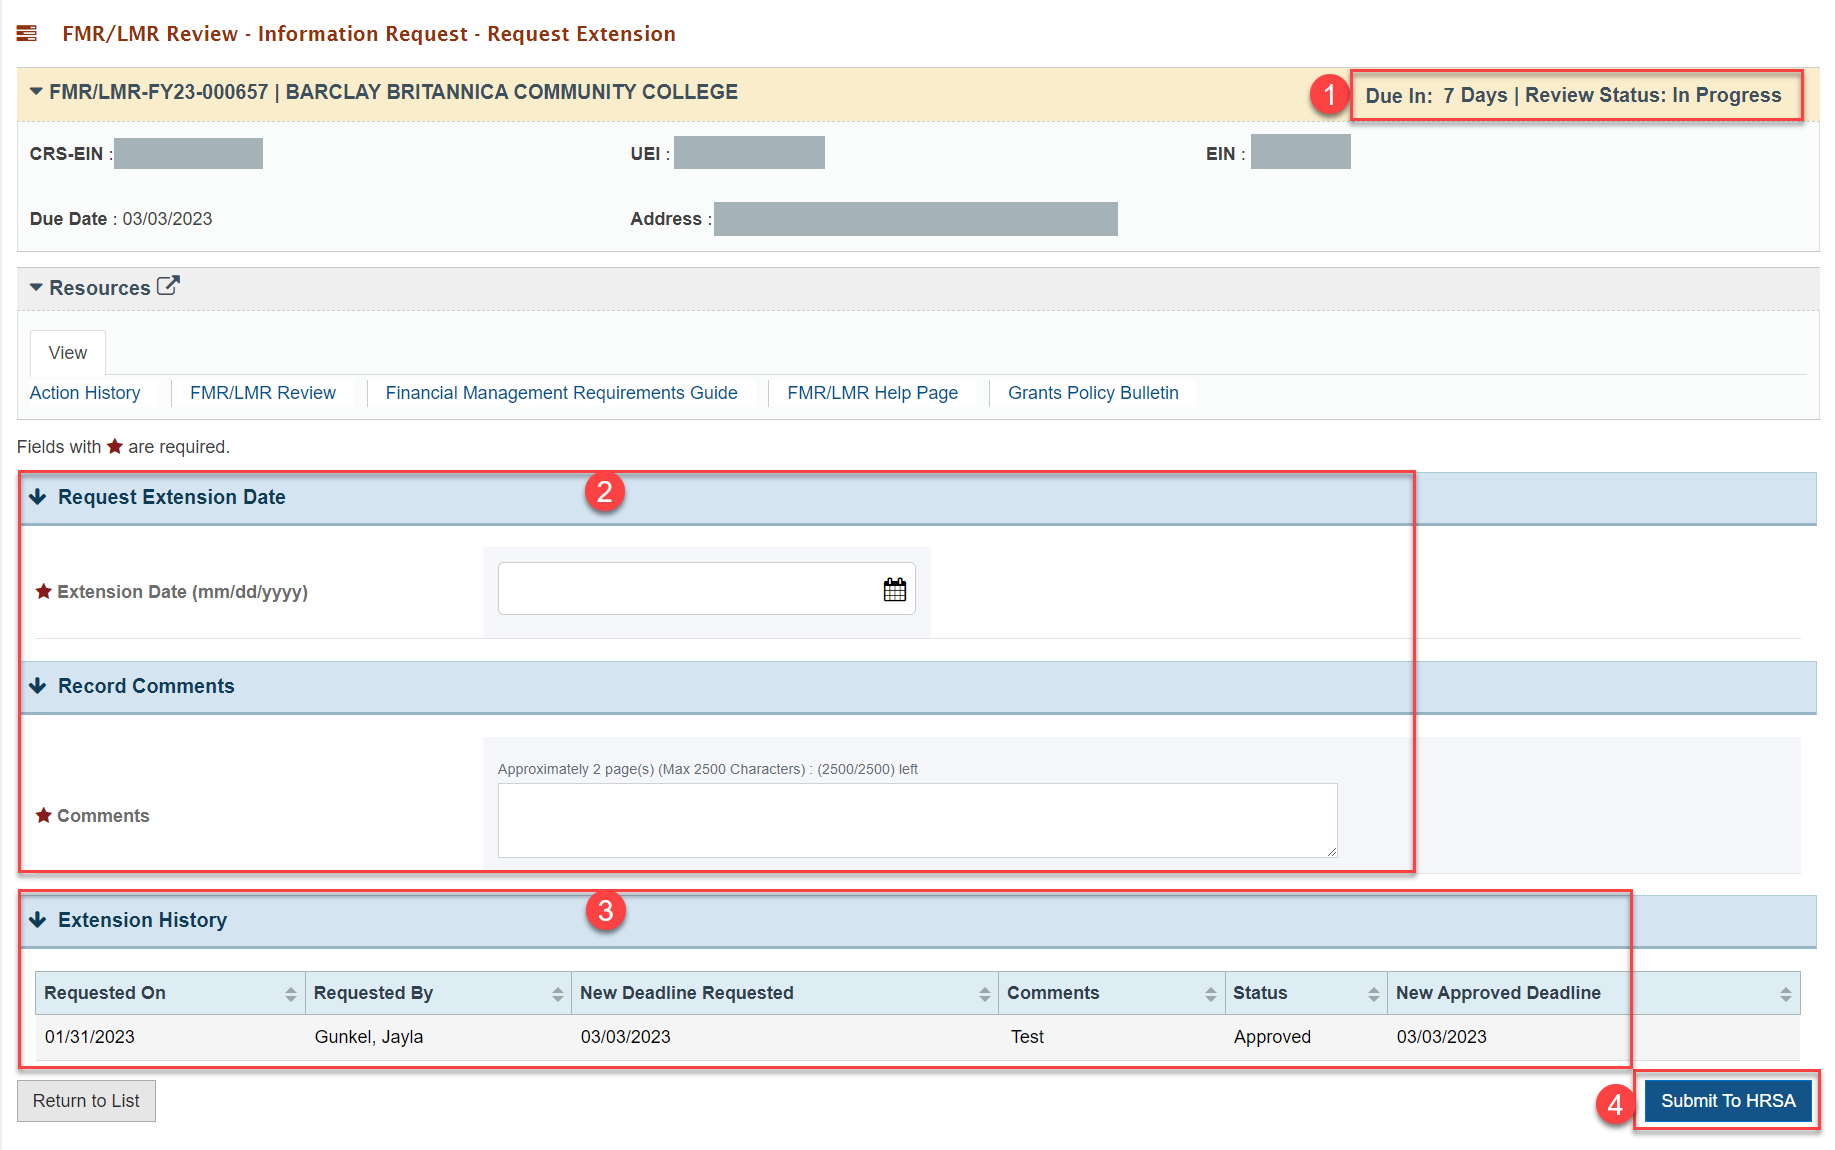 Screenshot of the Request Extension page showing date and comments fields, and Submit to HRSA button